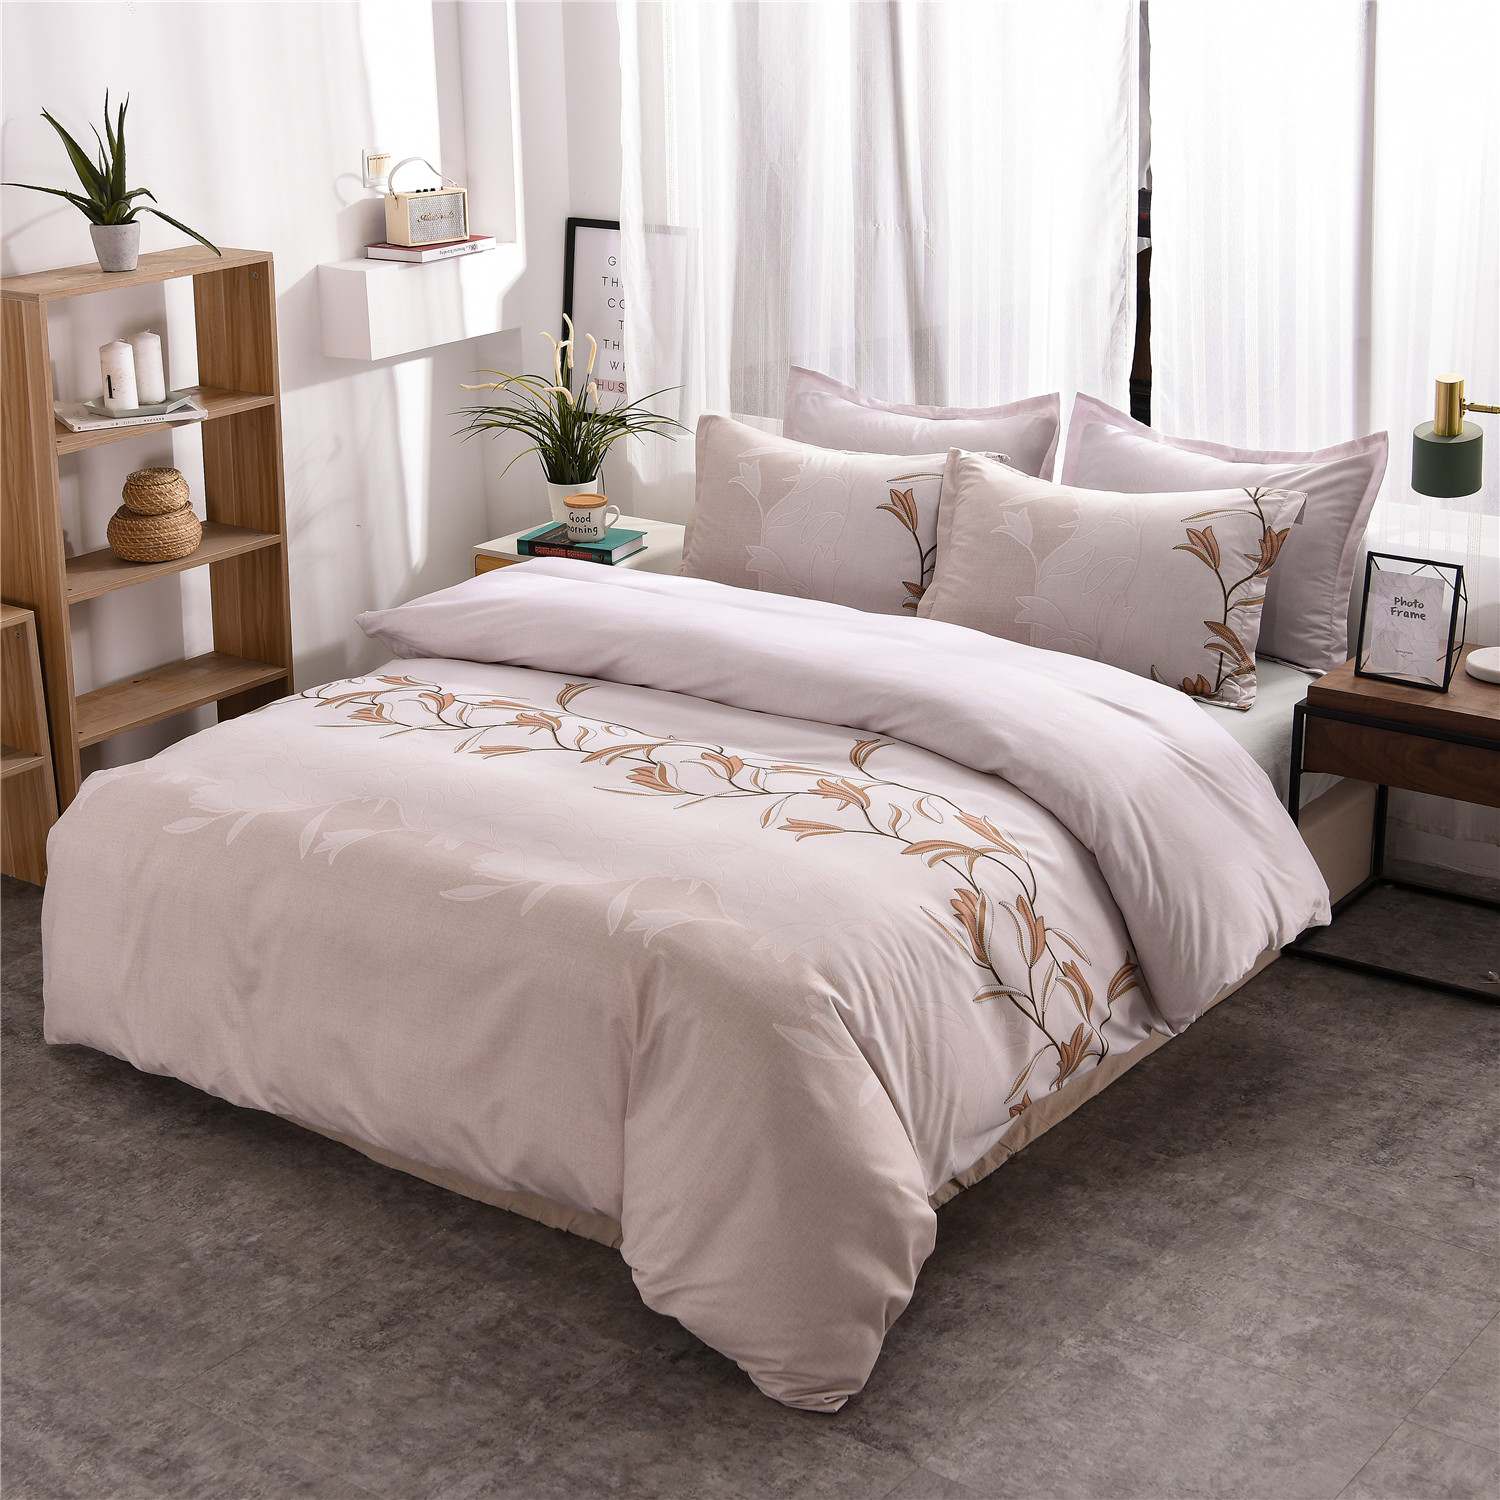 Bed Linen Quilt Covers, Simple Luxury Duvet Cover